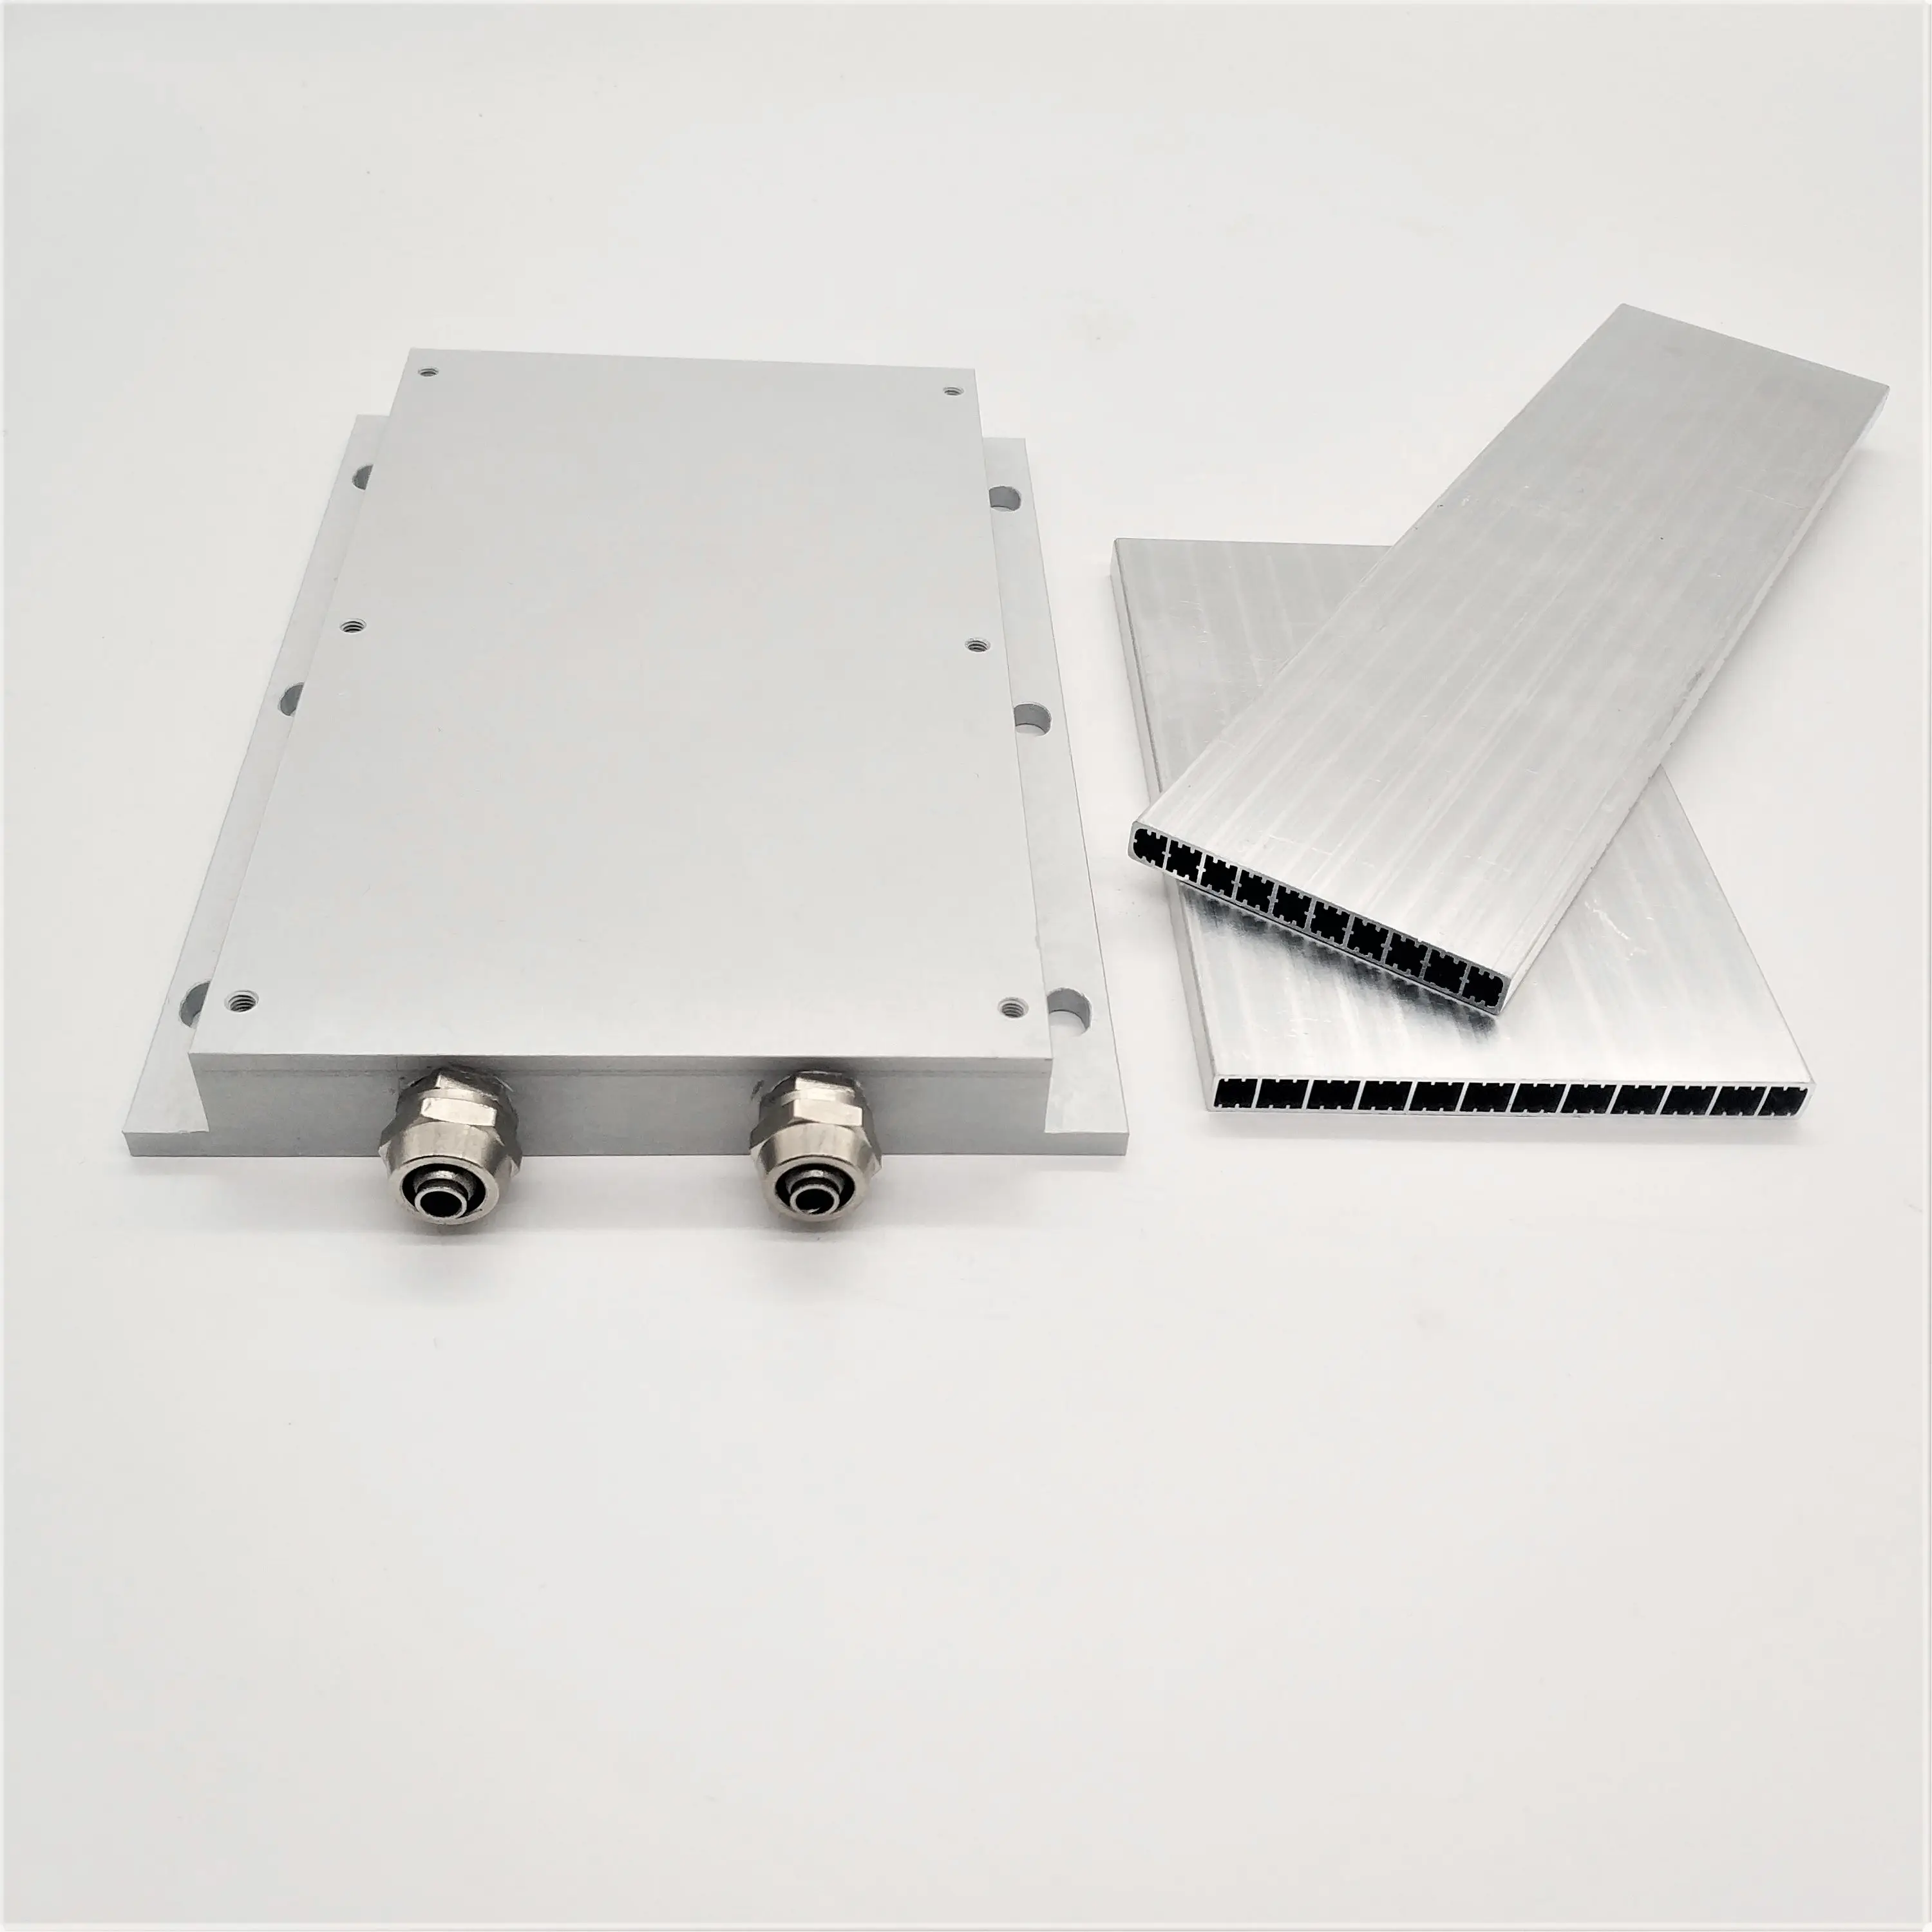 New Liquid Cooling Plate Aluminum Water Cooling Block With Brazed Battery CNC Machining Liquid Cold Plate For Improved Cooling